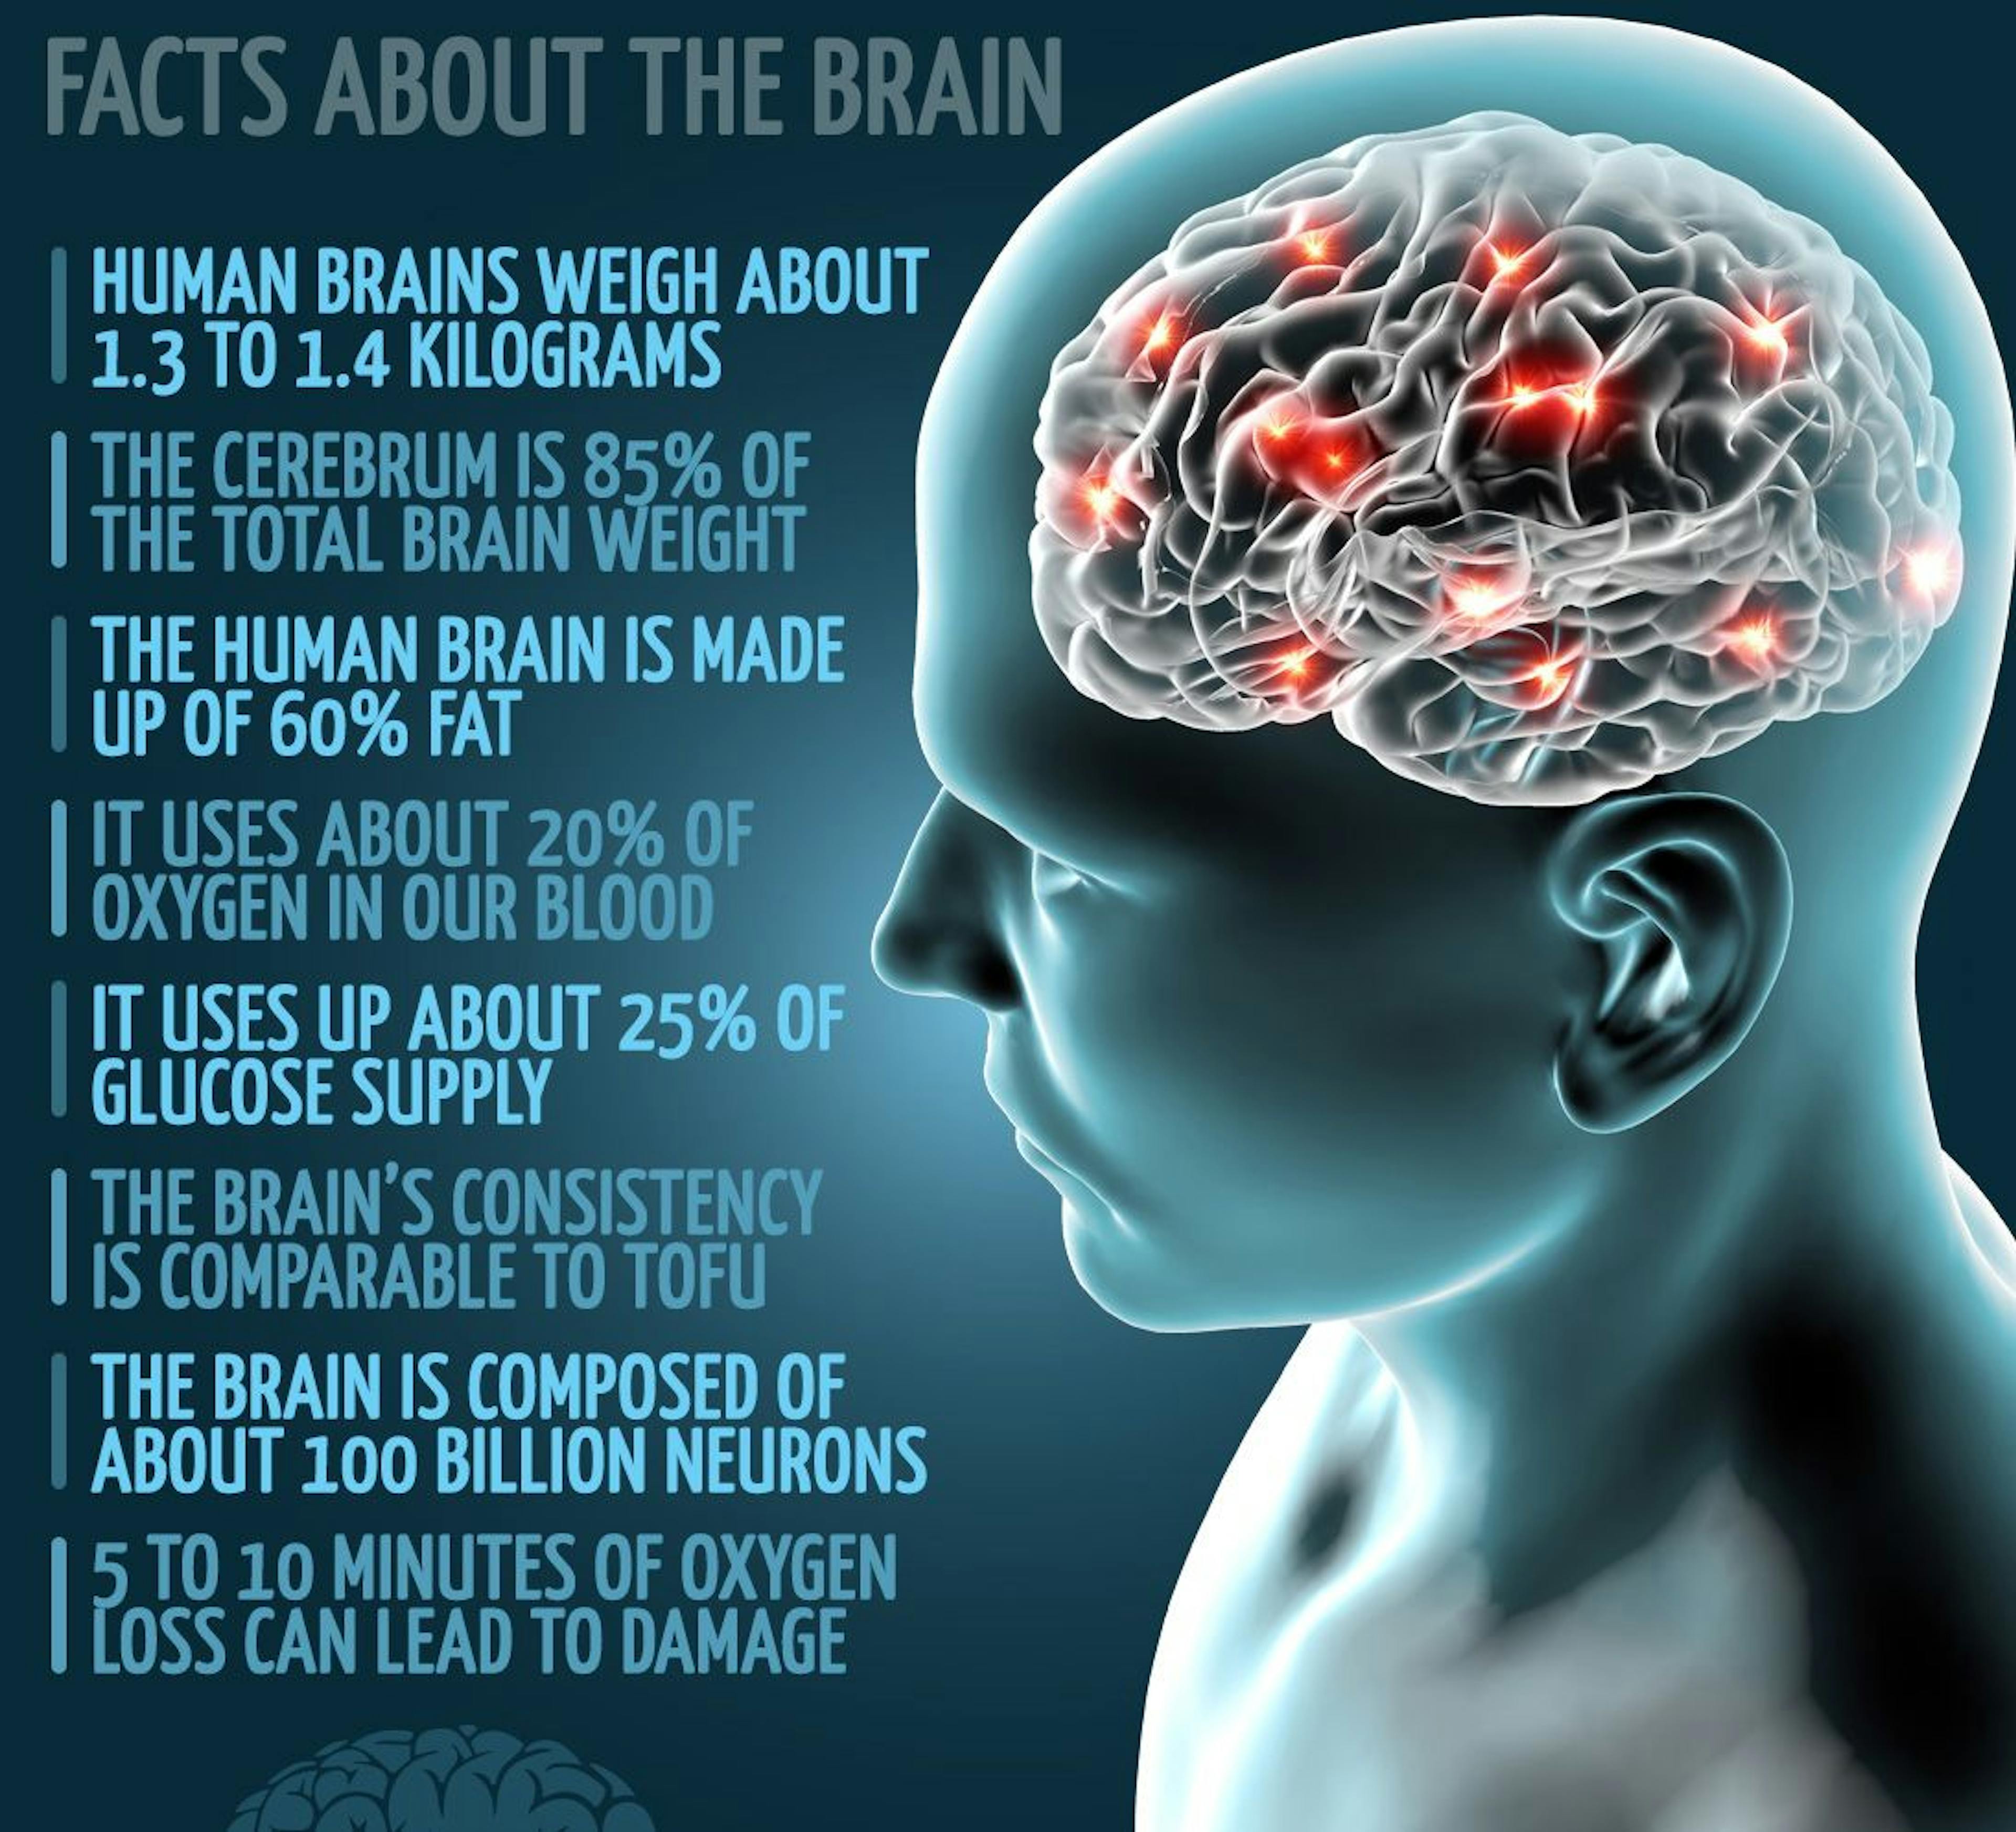 Interesting facts about the human brain